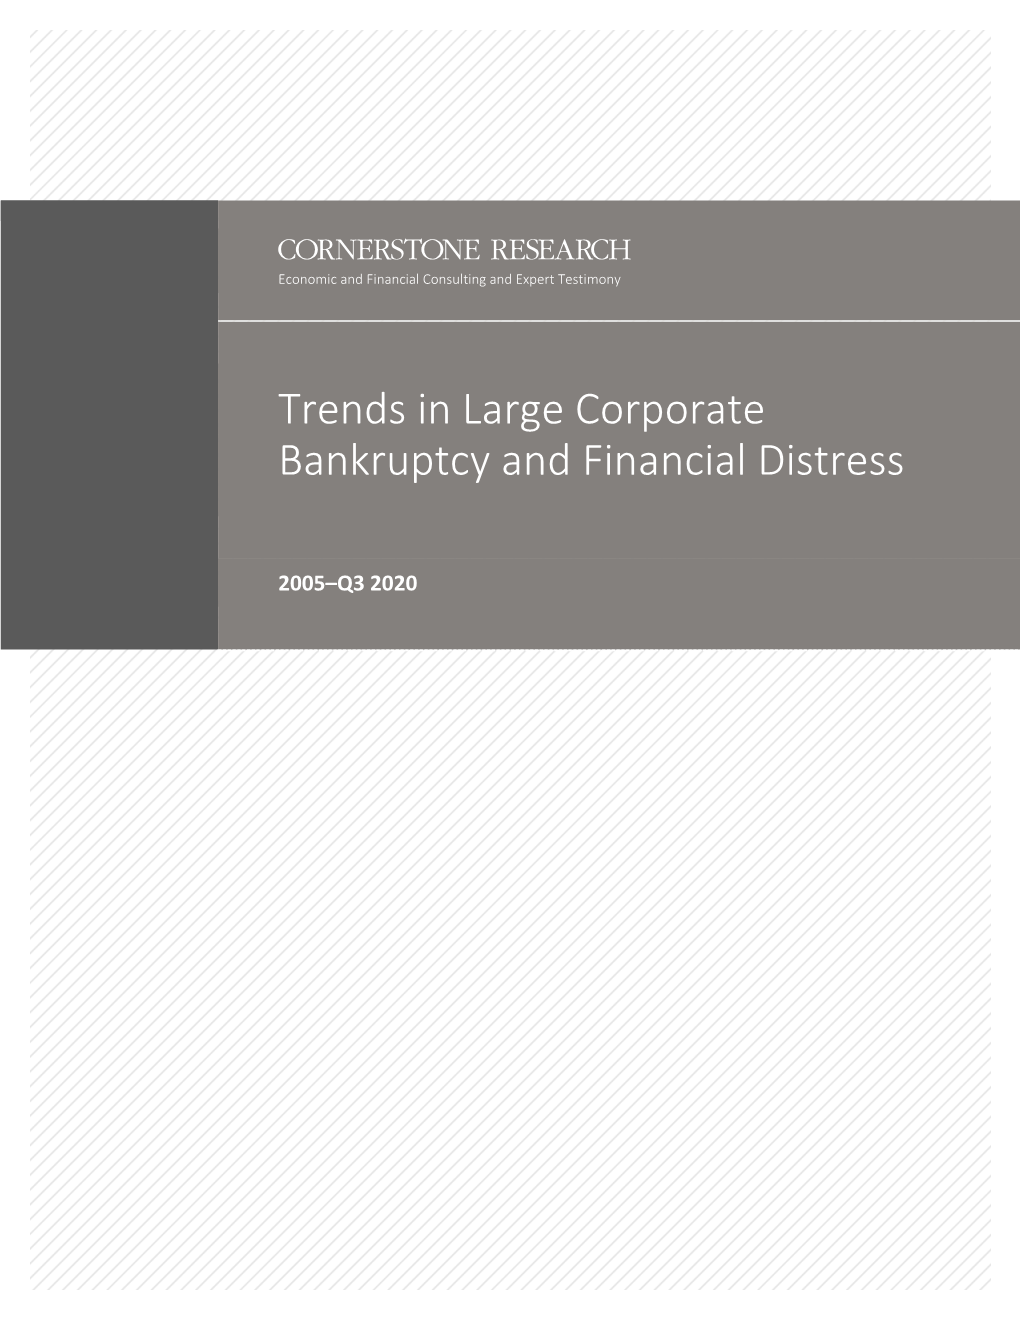 Trends in Large Corporate Bankruptcy and Financial Distress